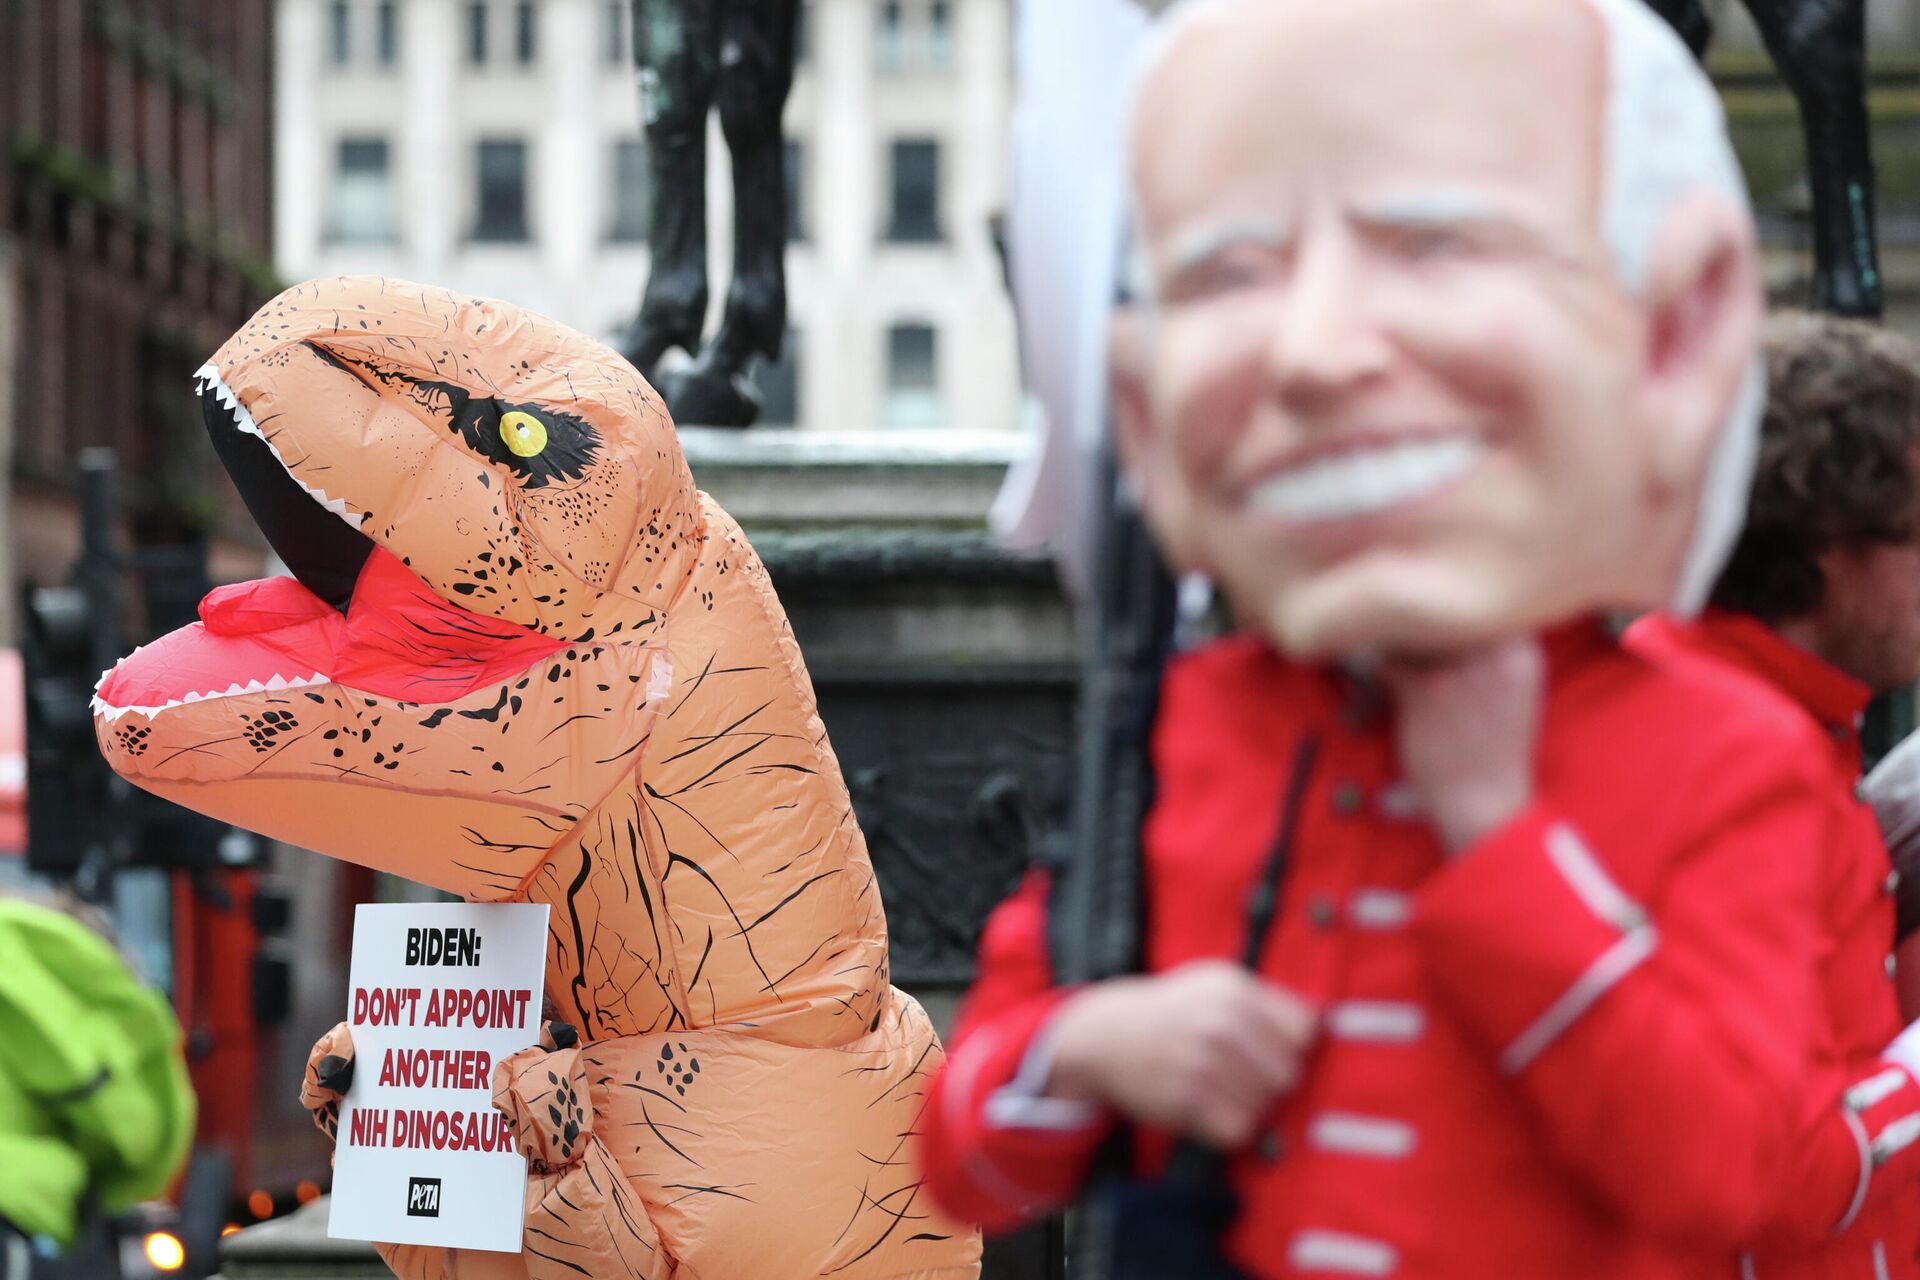 A protester from PETA gatecrashes a protest of the Oxfam 'Big Head' caricatures featuring US President Joe Biden protesting on the fringes of the COP26 U.N. Climate Summit in Glasgow, Scotland, Monday, Nov. 1, 2021. - Sputnik International, 1920, 01.11.2021